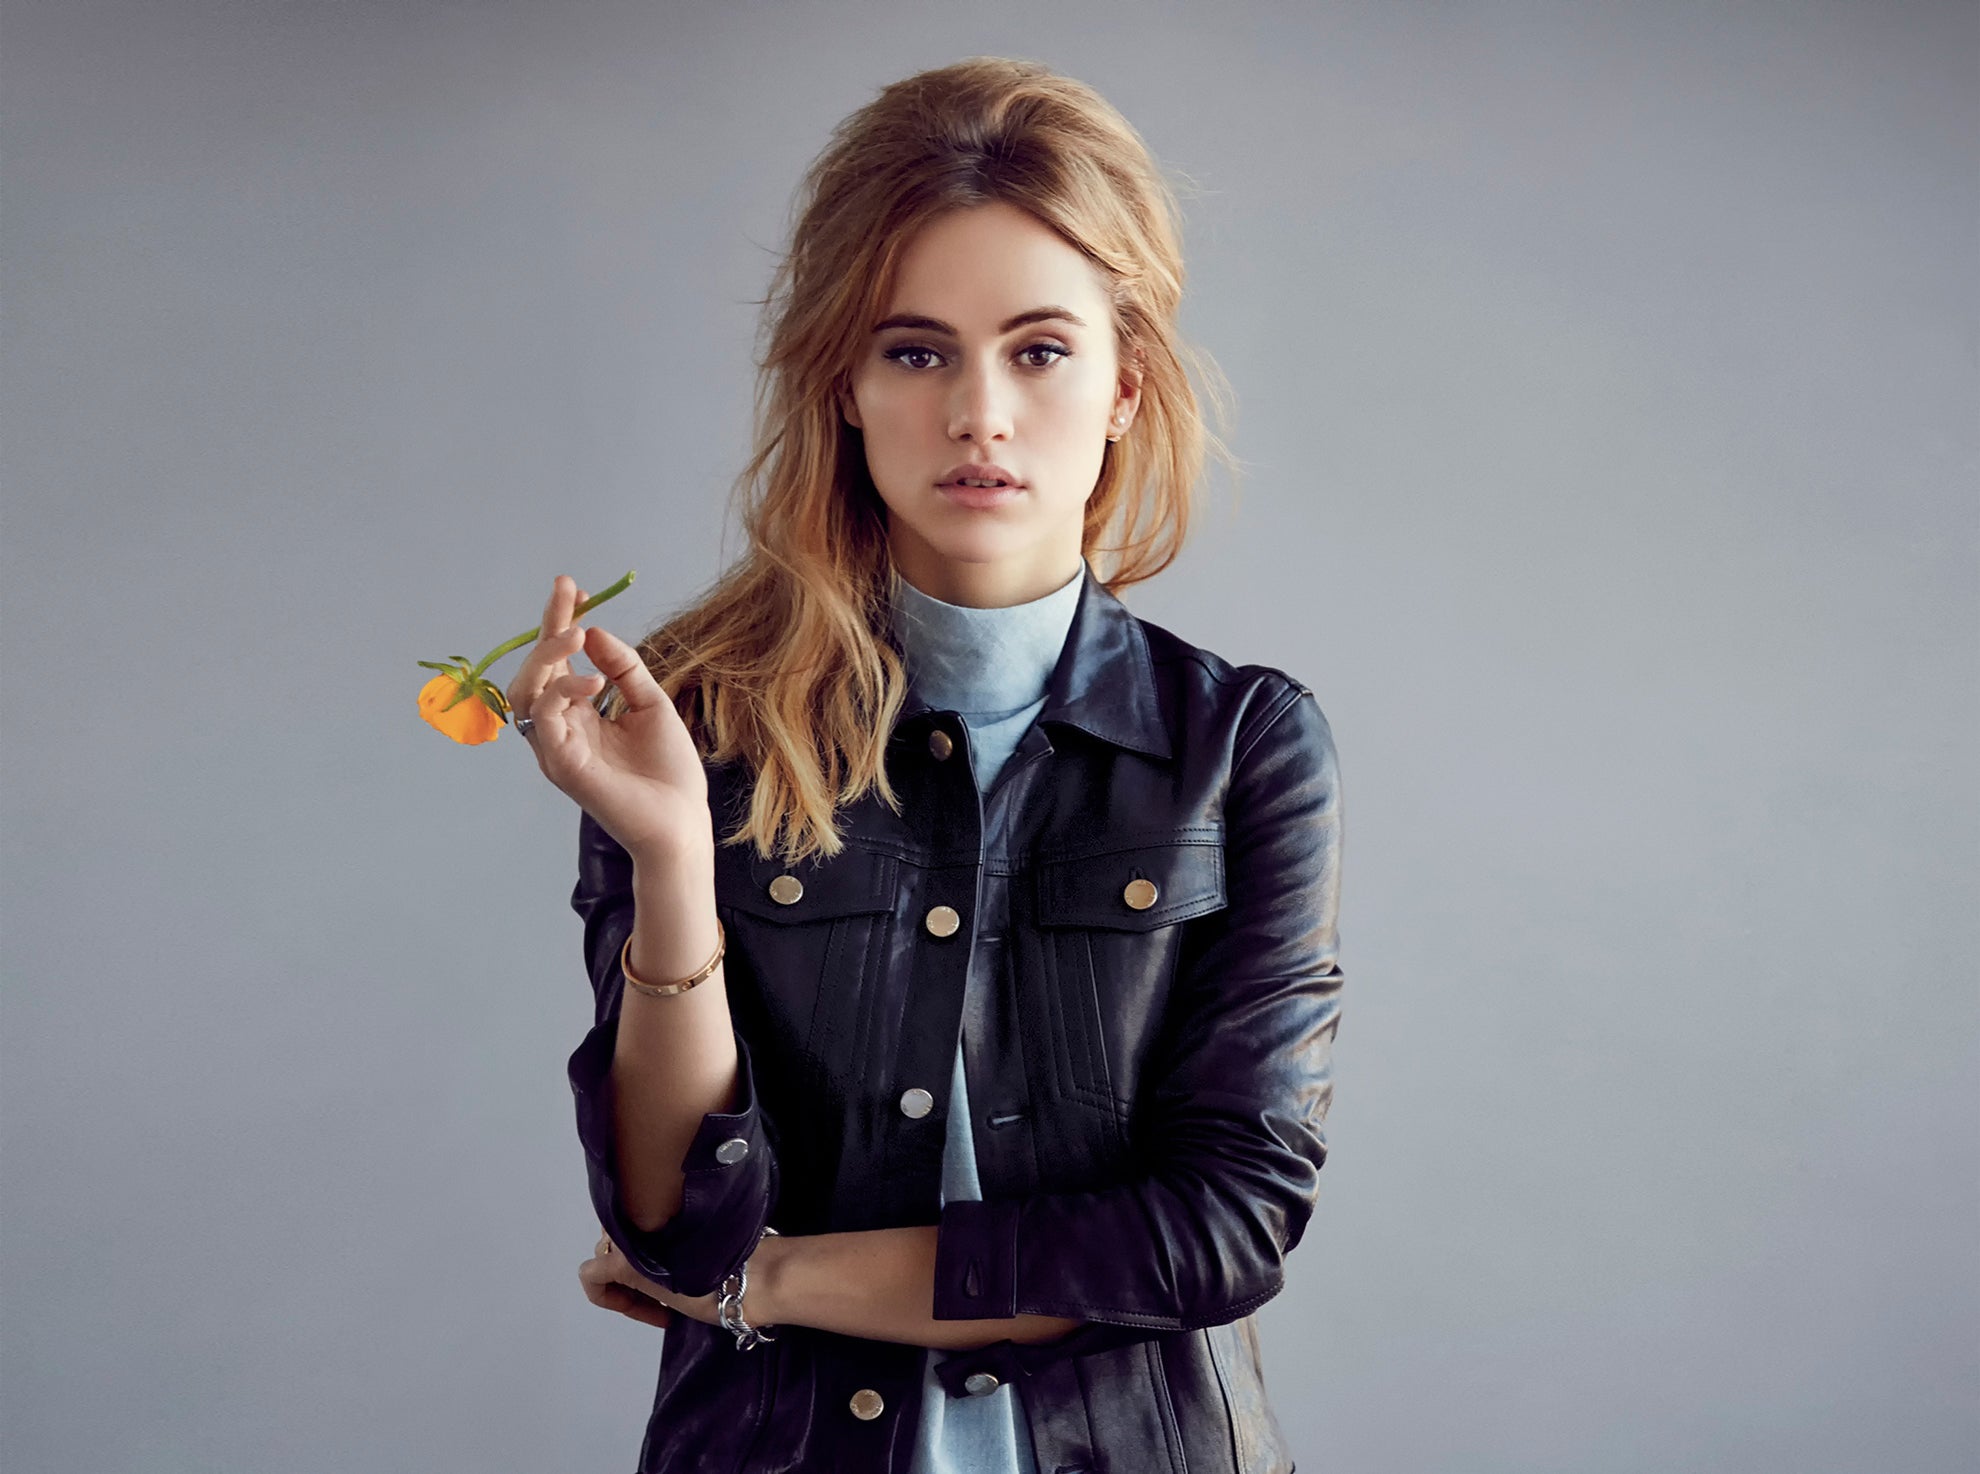 Suki Waterhouse holding a flower. She is standing indoors, wearing fashionable clothing and is the focus of a photo shoot.